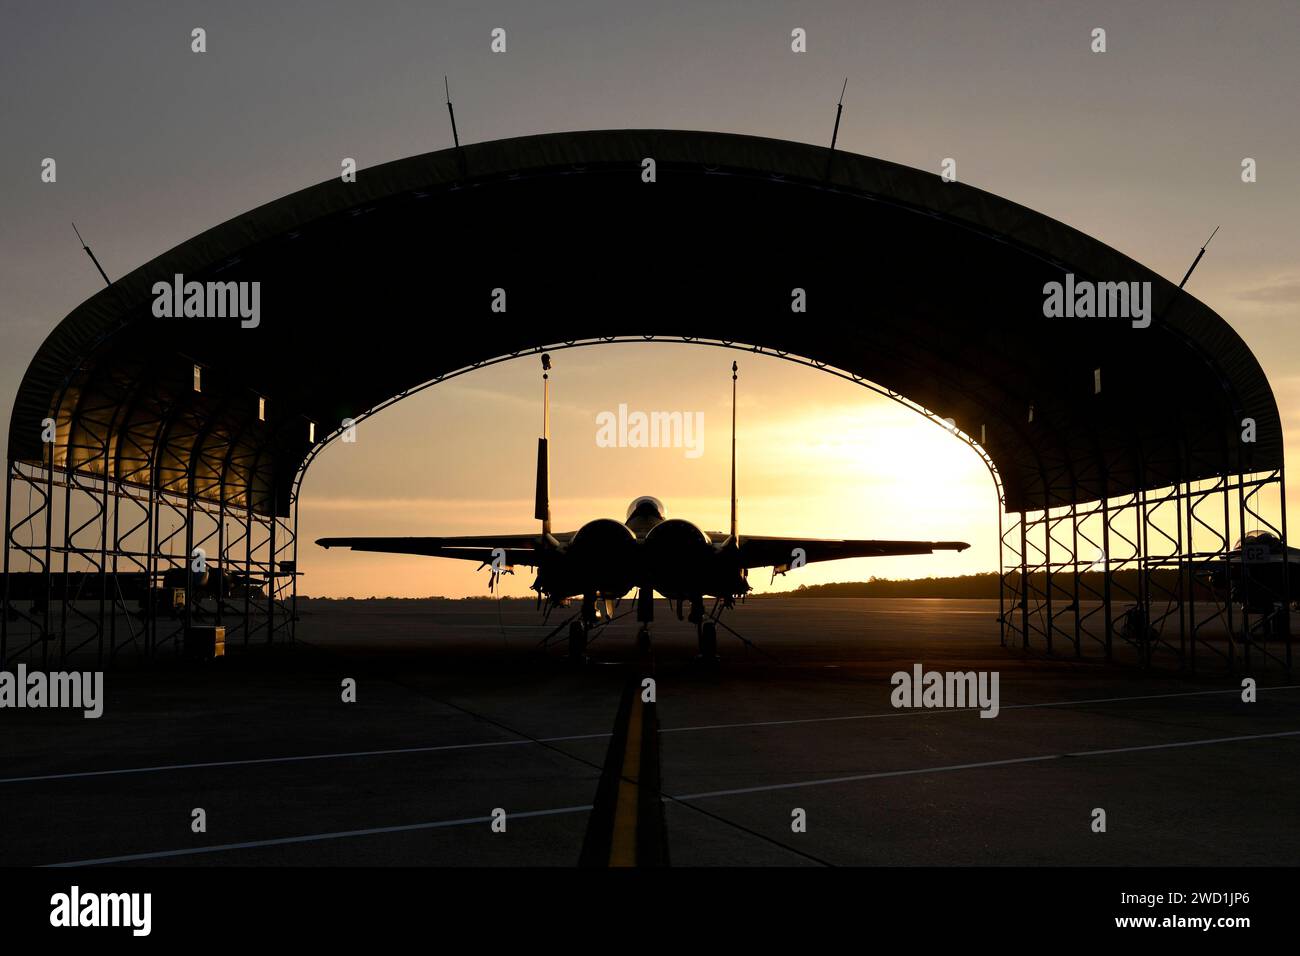 A U.S. Air Force F-15E Strike Eagle sits under a canopy on the flightline at an airbase in North Carolina. Stock Photo